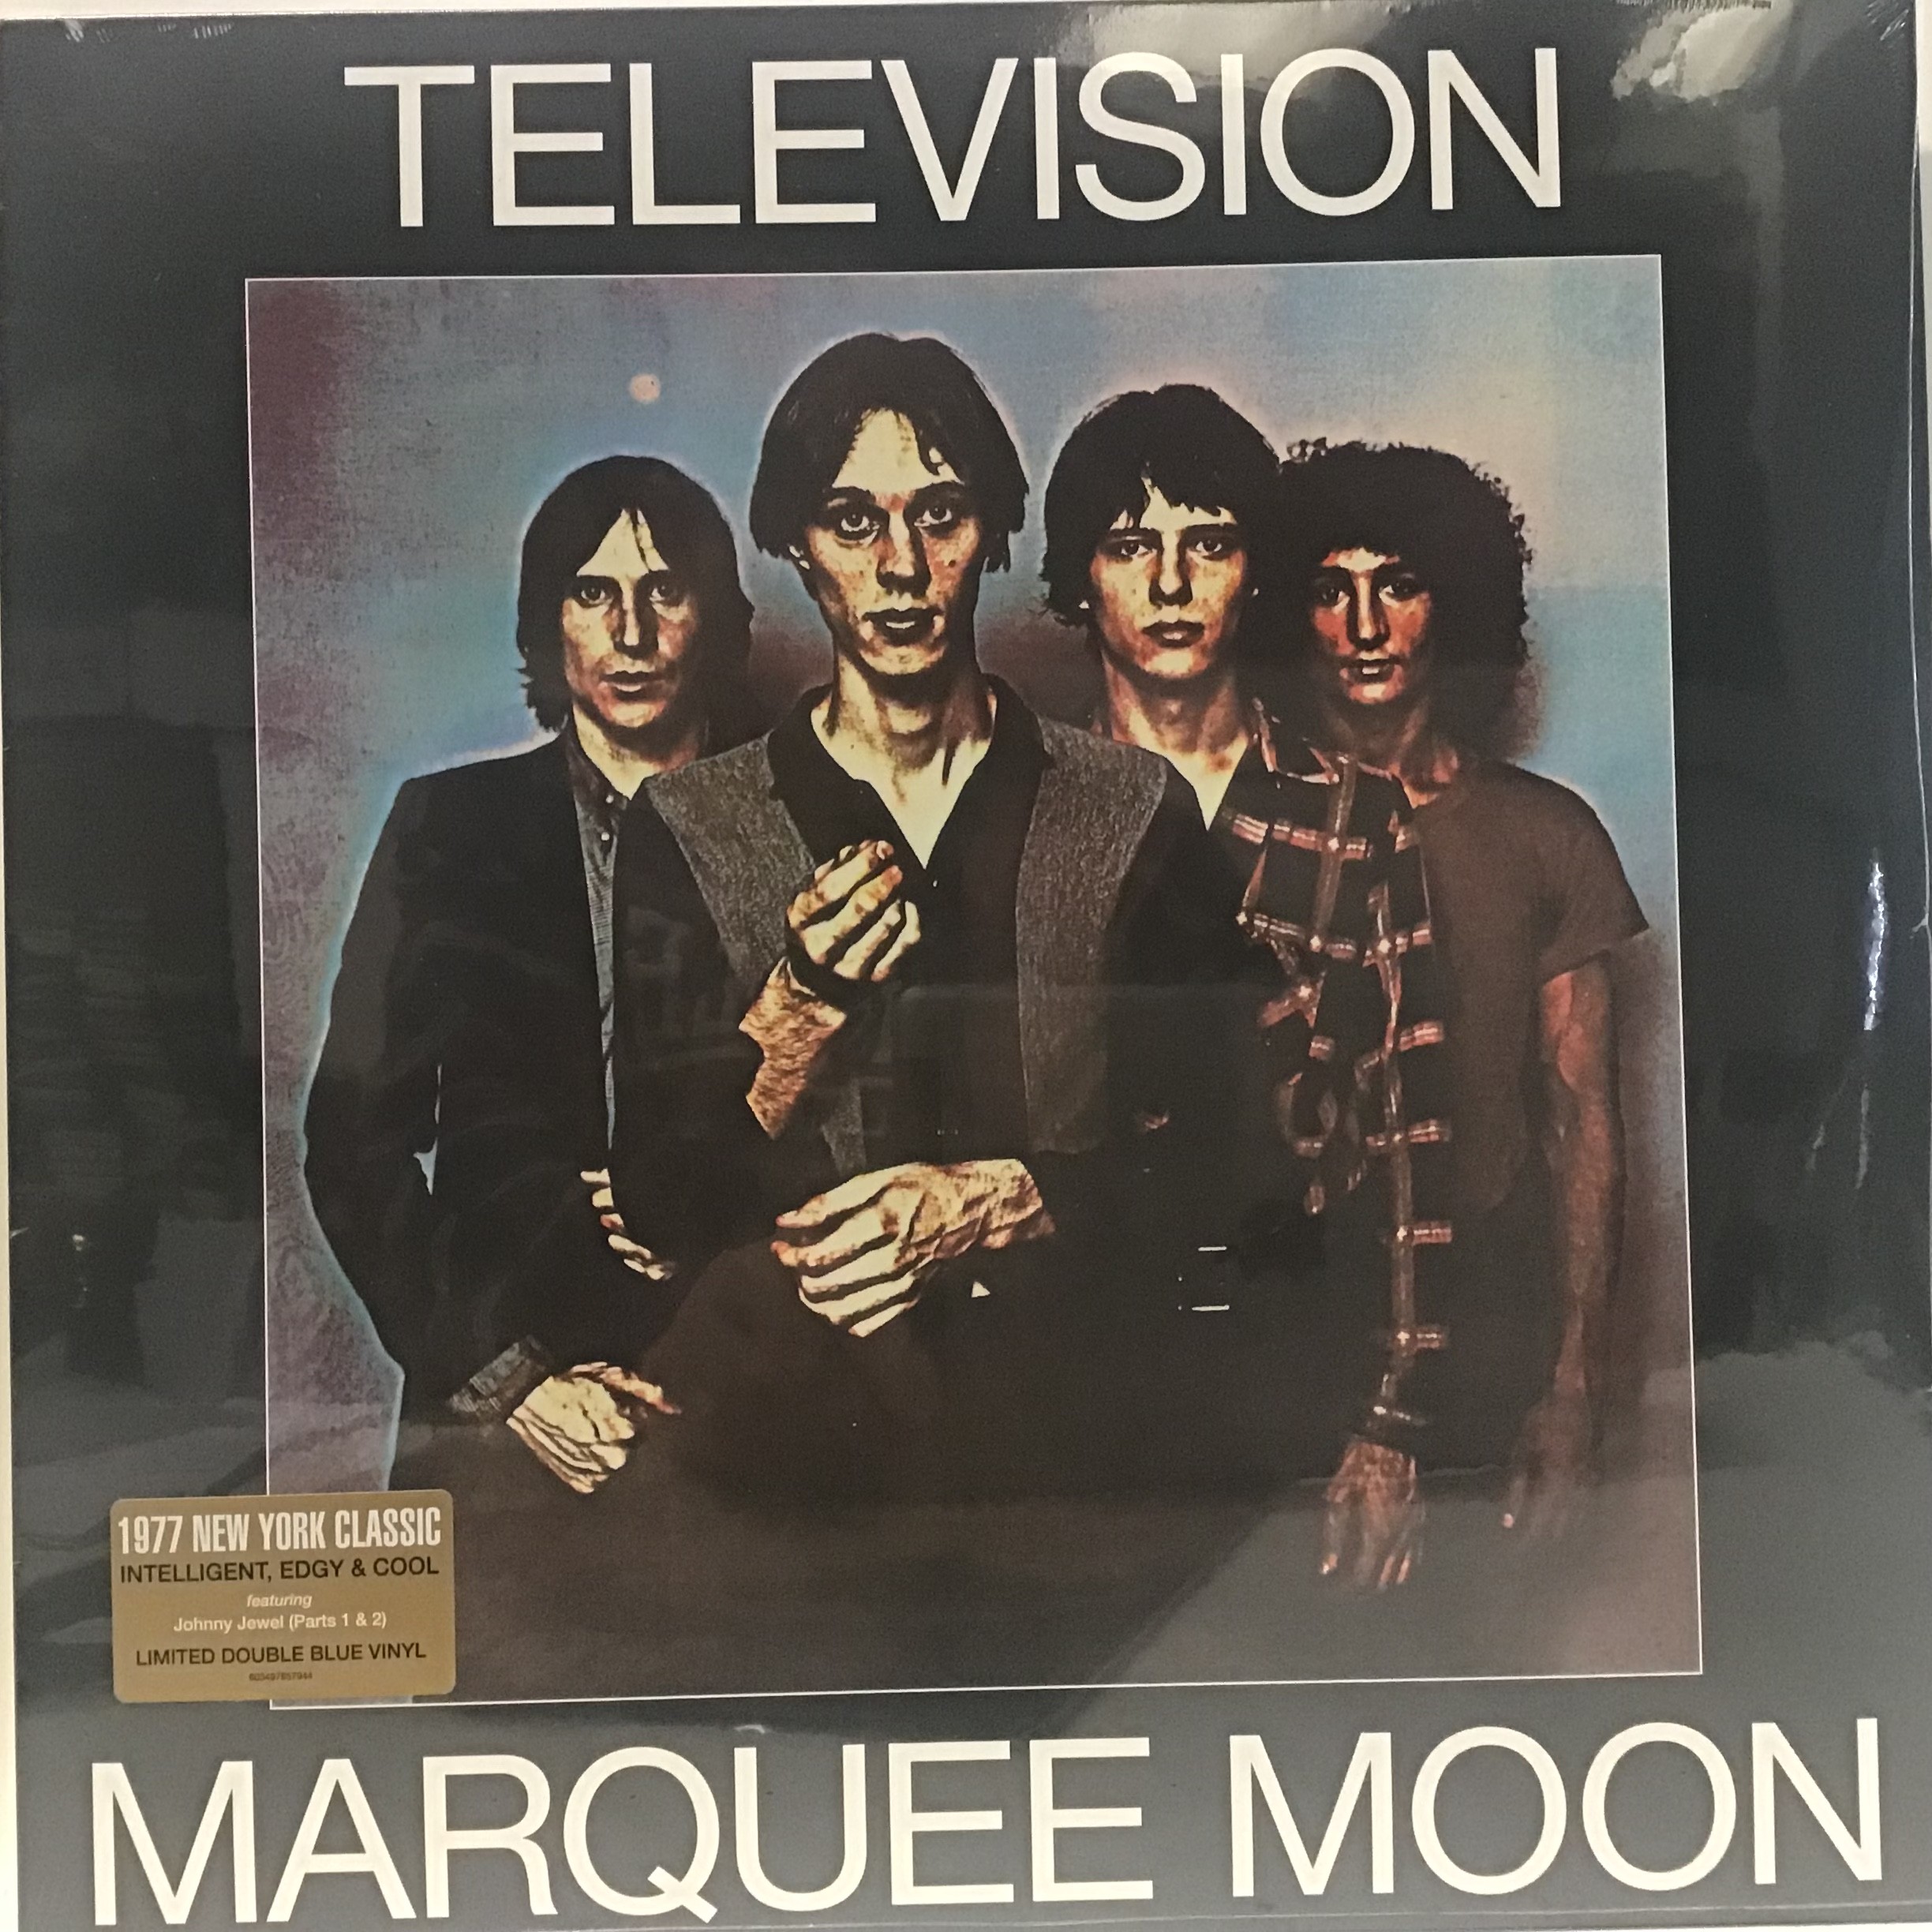 TELEVISION ‘MARQUEE MOON’ DOUBLE BLUE VINYL ALBUM. This edition is from 2018 and found on this